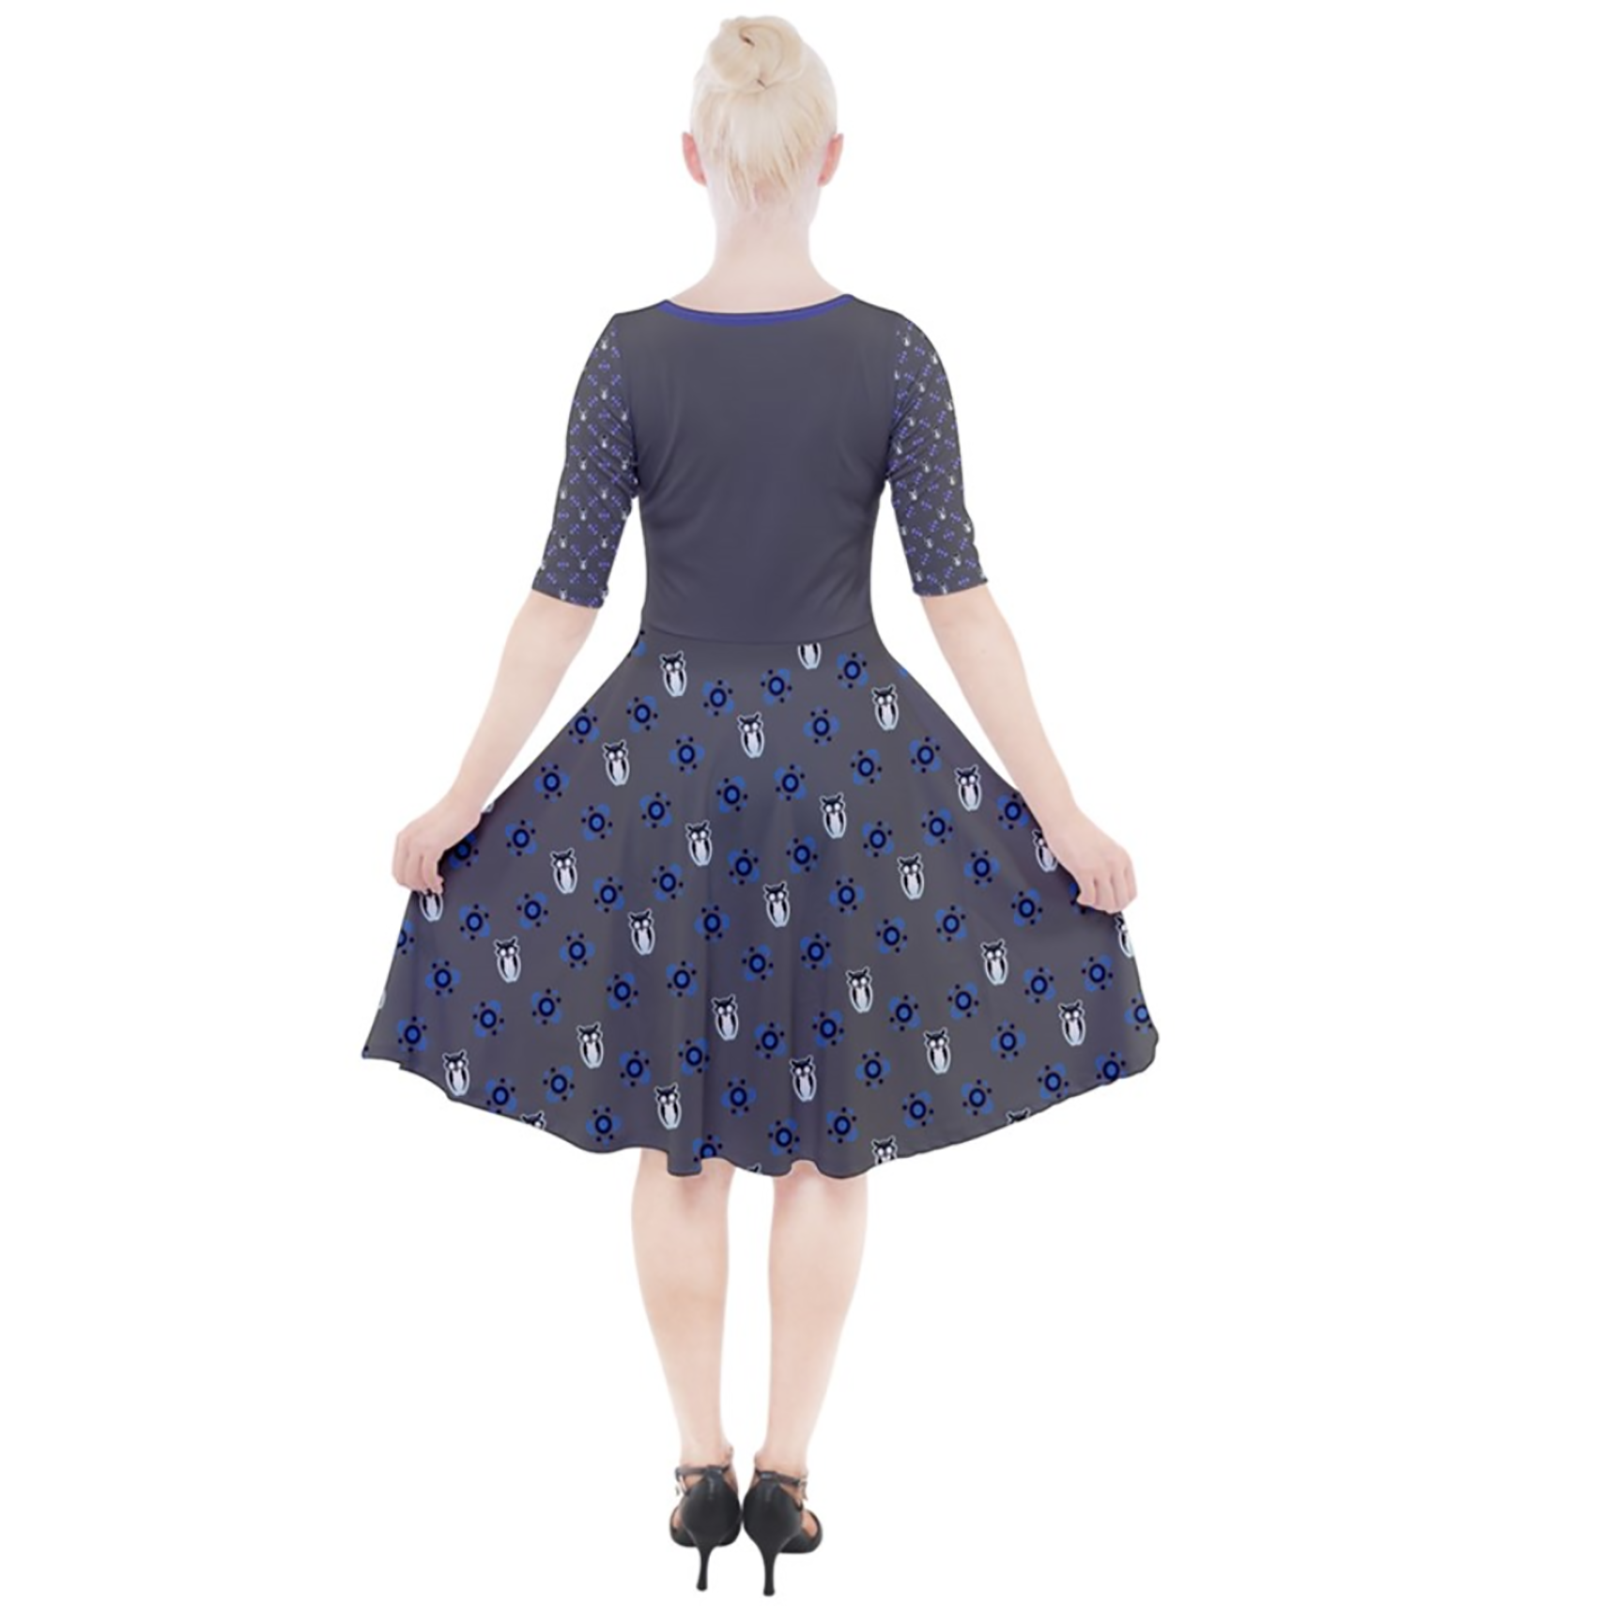 Owl (Blue) Patterned Dress - Quarter Sleeve A-Line Dress - Inspired by Ravenclaw